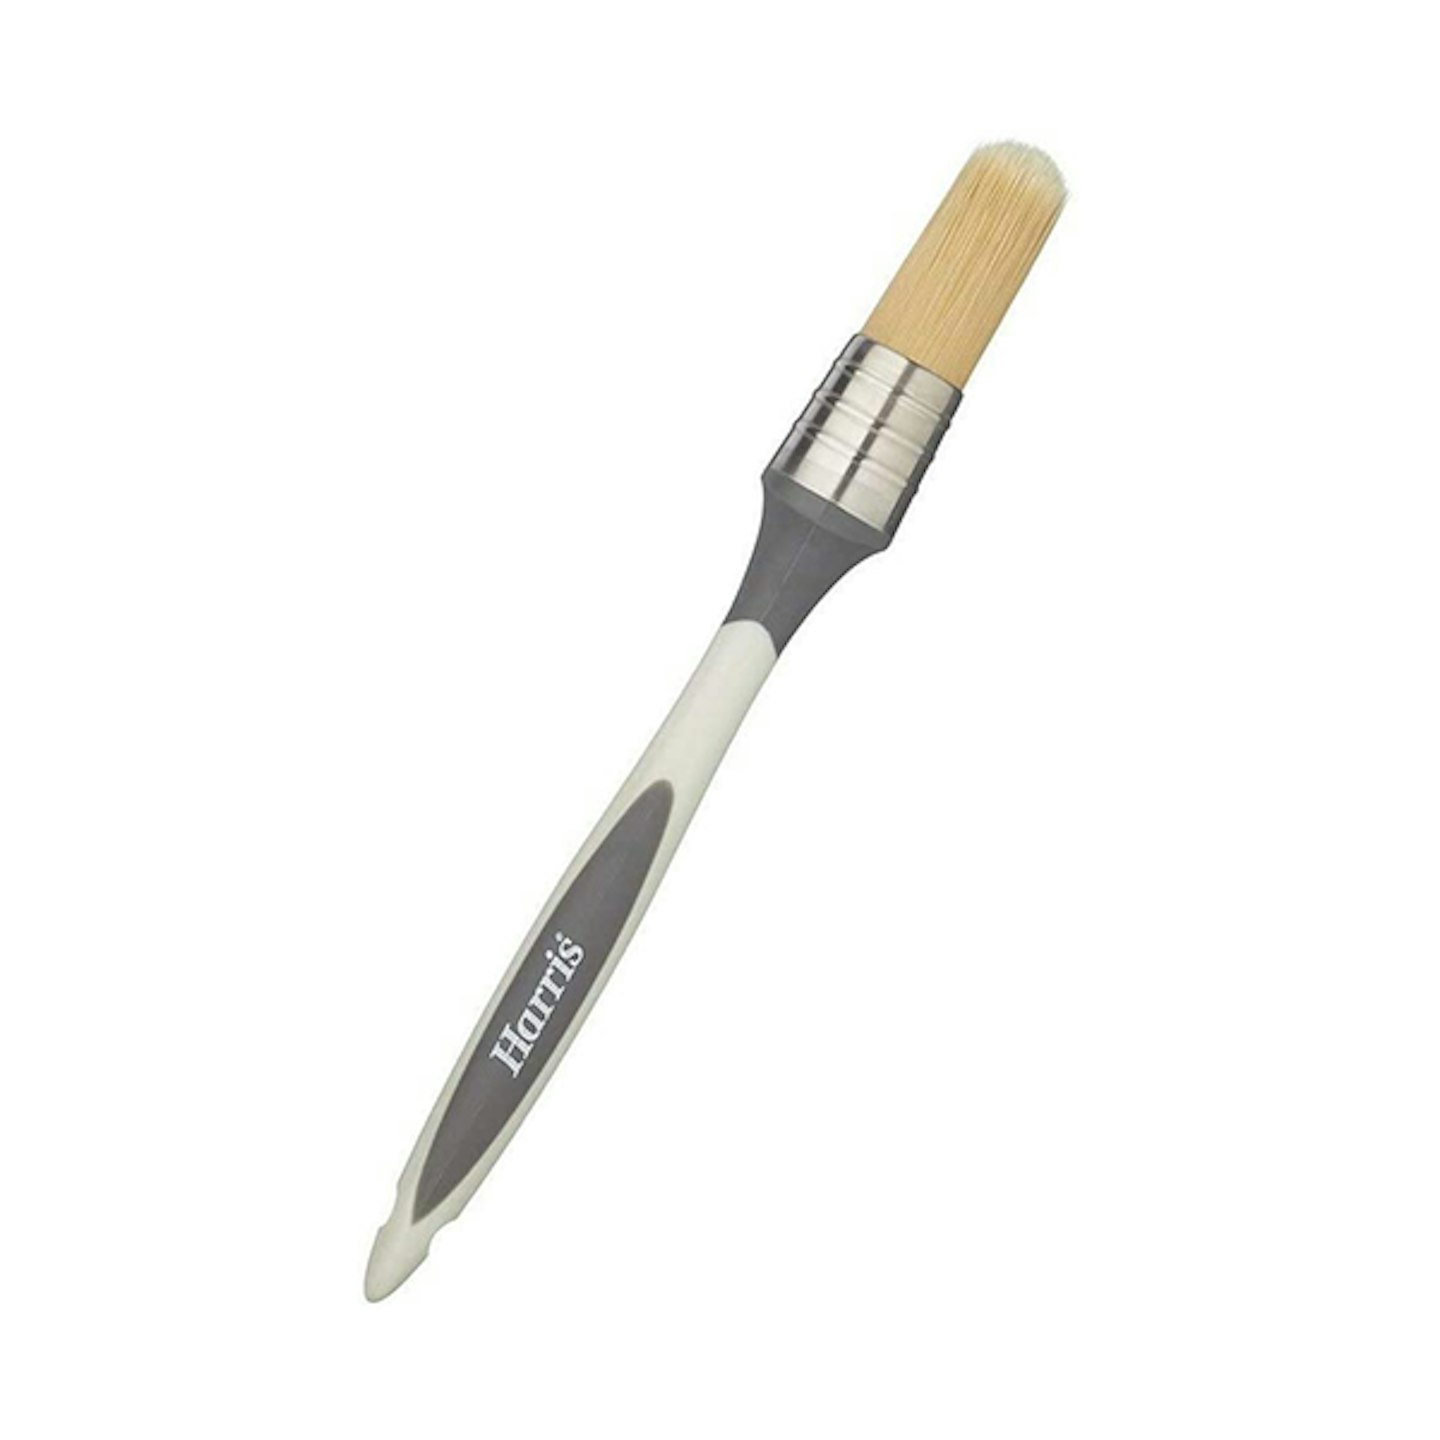 Harris 102021051 21mm Seriously Good Woodwork Stain & Varnish Round Paint Brush